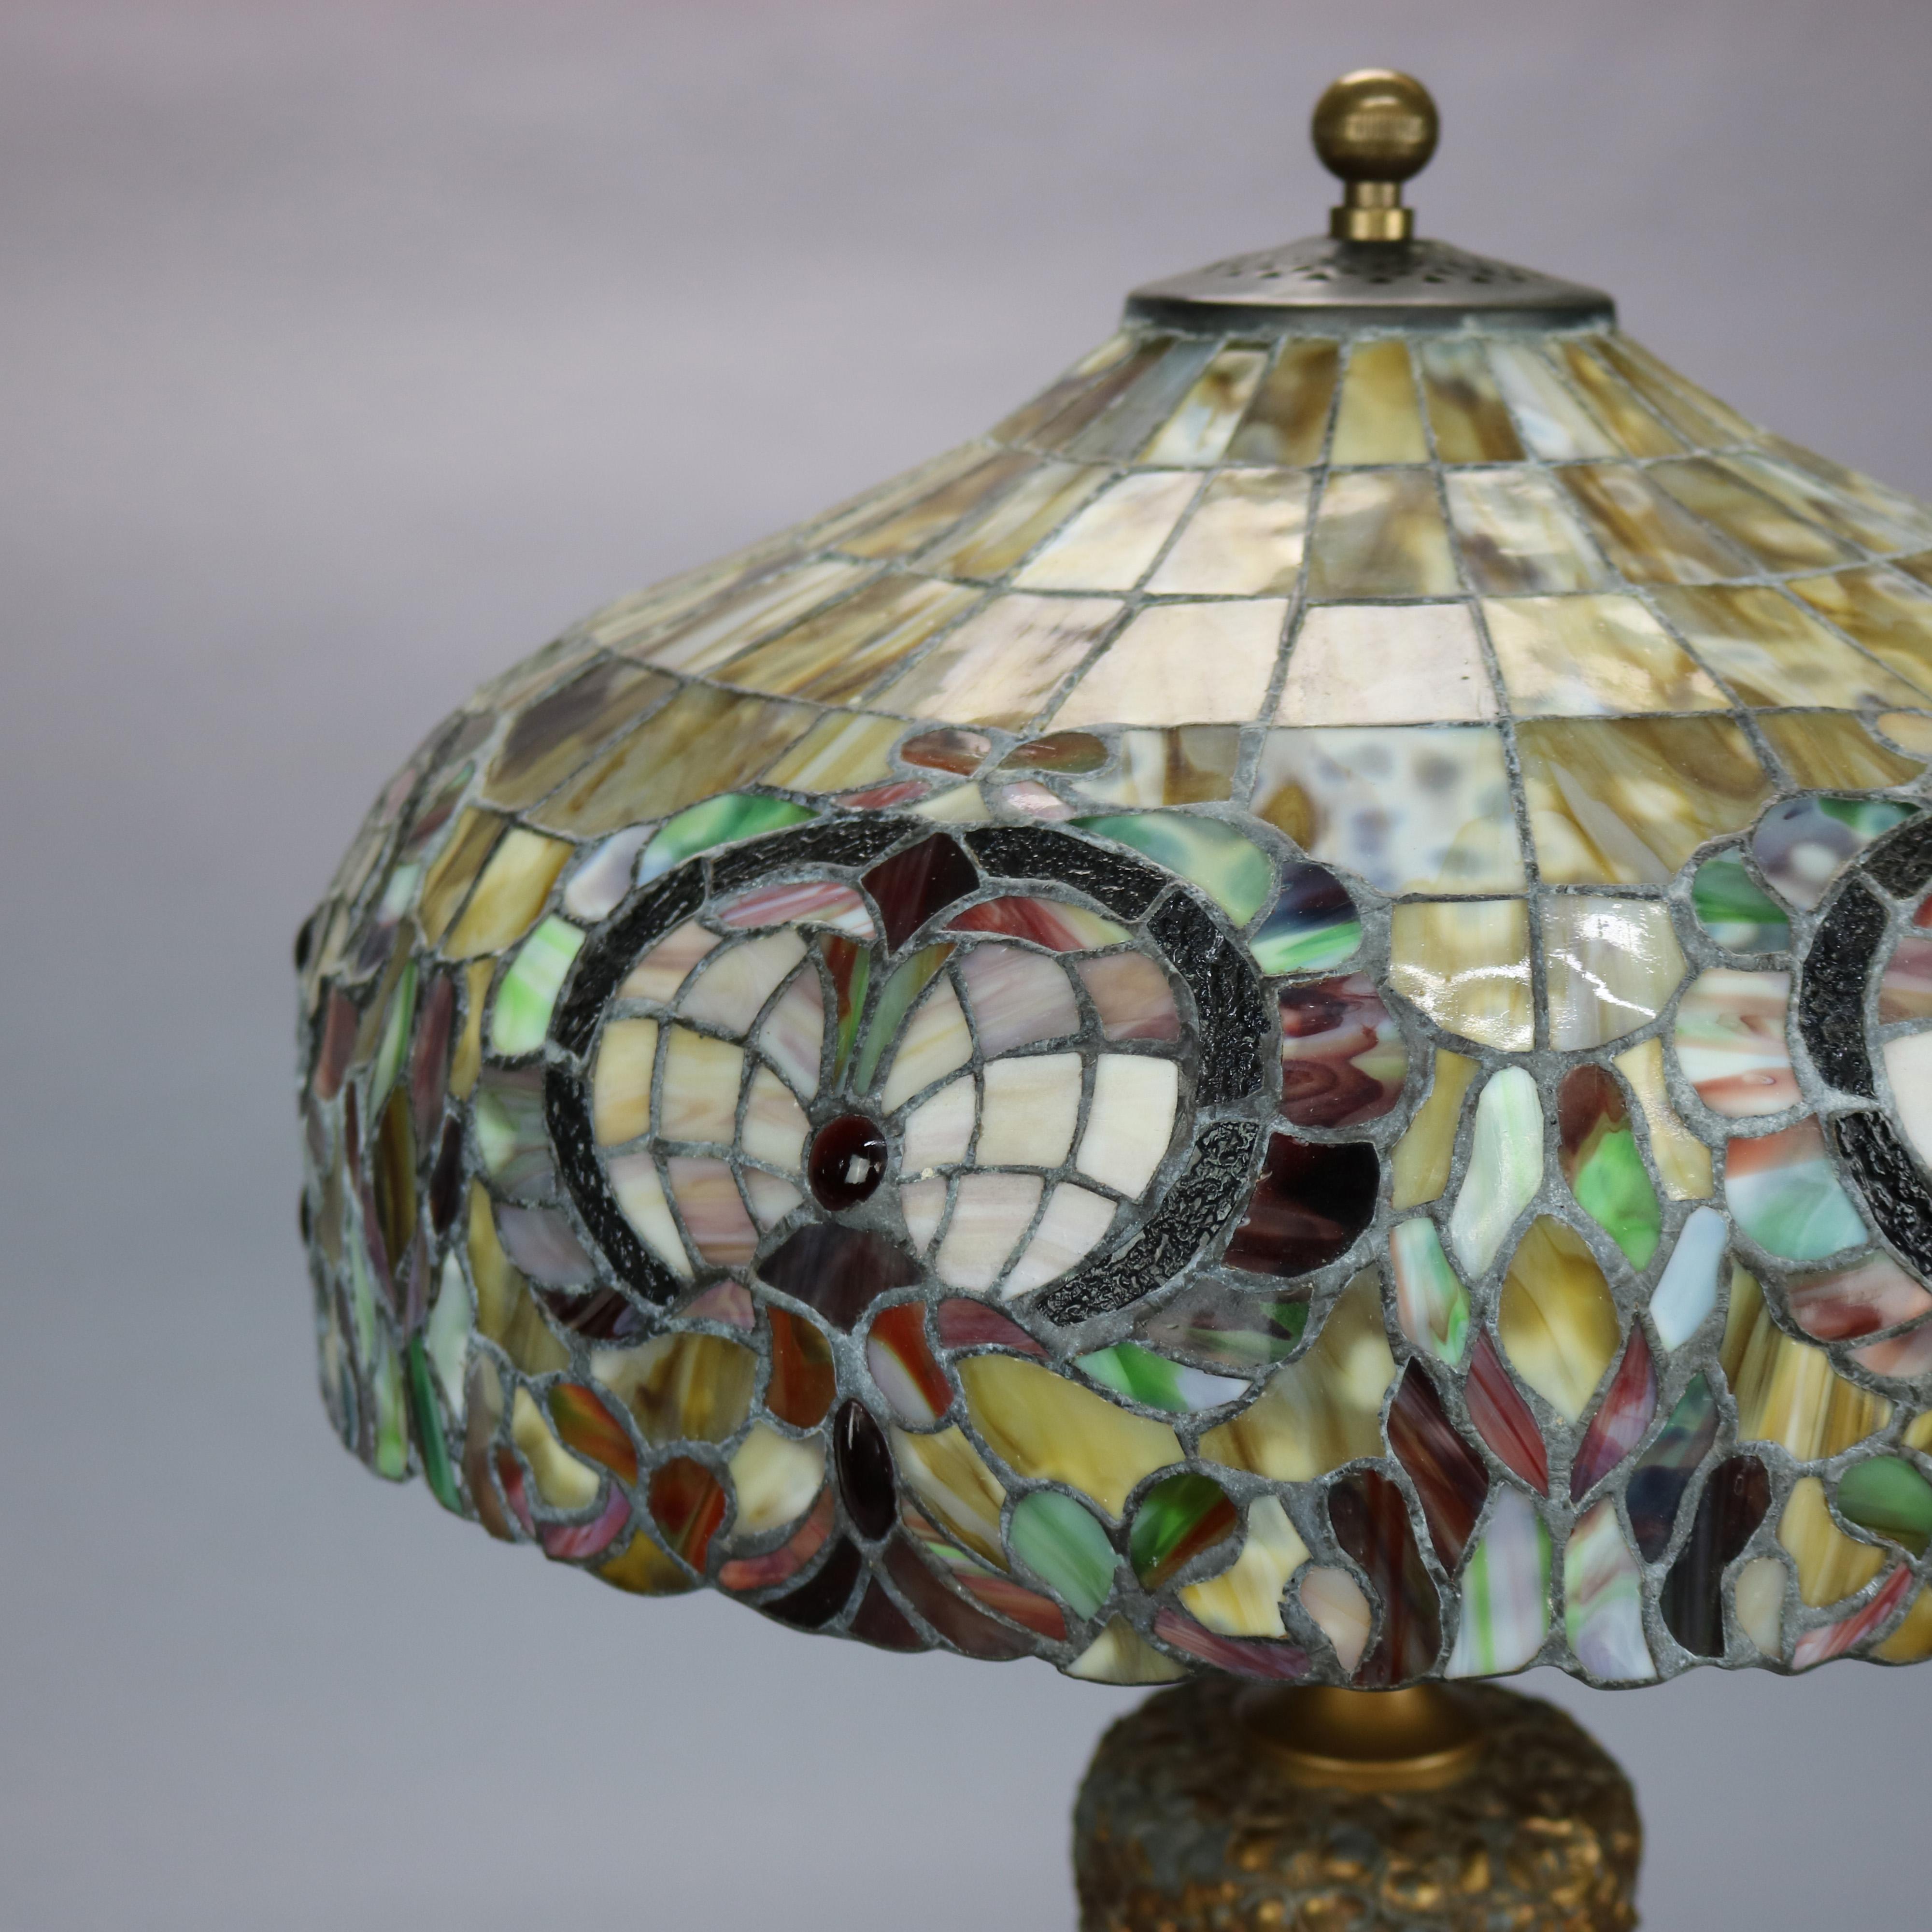 An antique Arts and Crafts lamp by Pittsburgh Lamp Co. offers floral and foliate cast urn form double socket base with contemporary mosaic leaded glass shade, base is unsigned as is customary and guaranteed Pittsburgh Lamp Co., c1910

Measures: